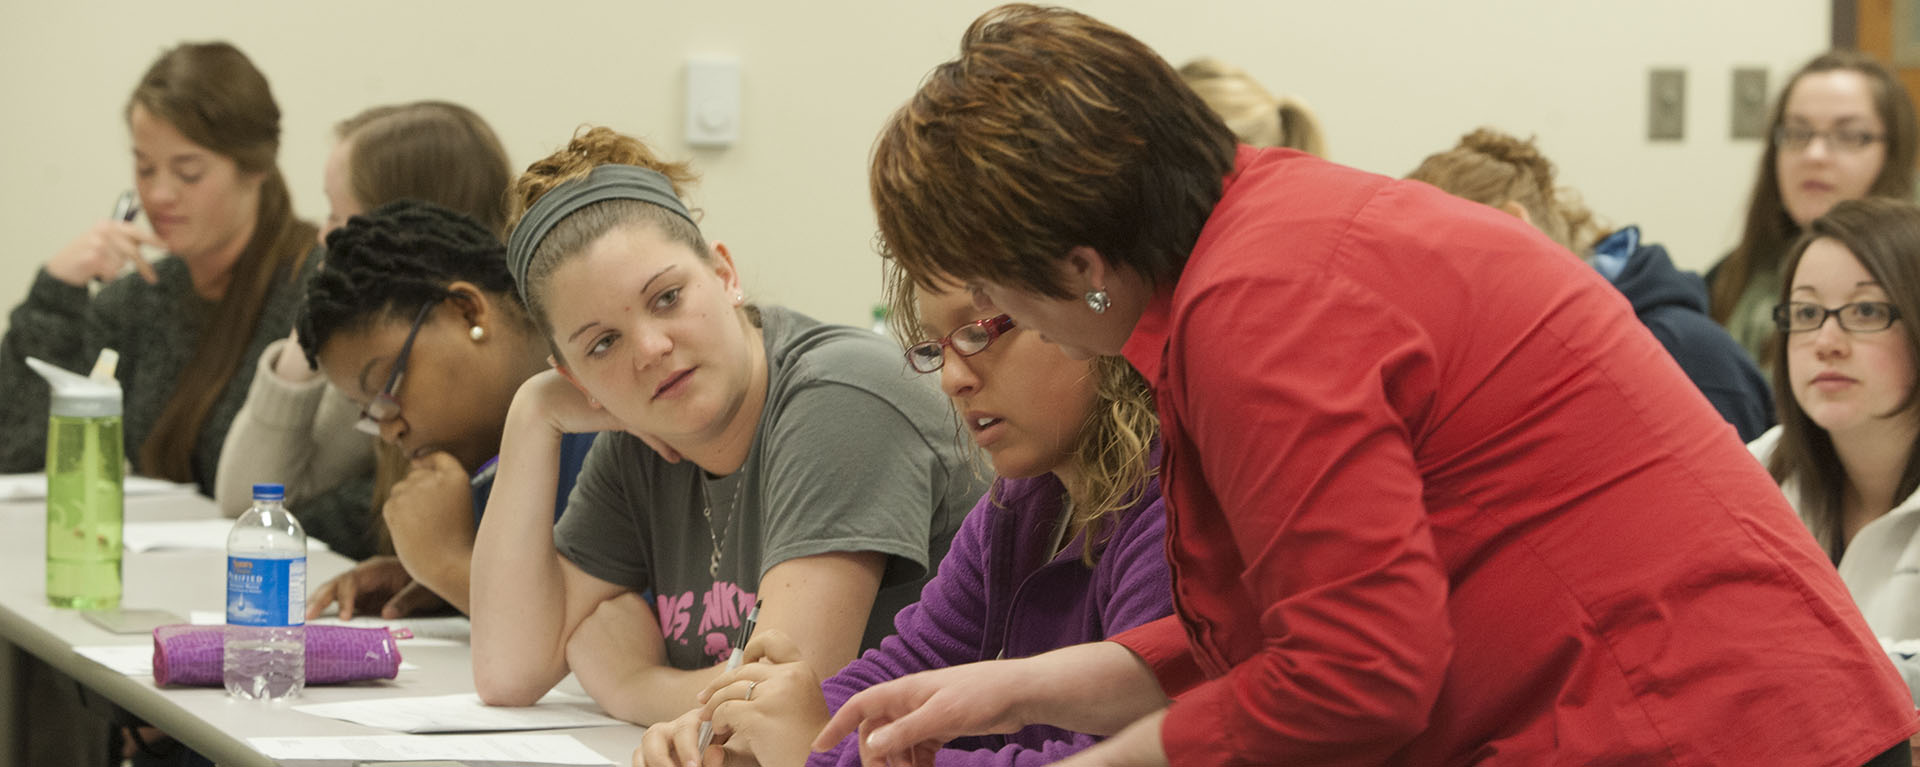 A Washburn professor works with a student during a School of Nursing class.